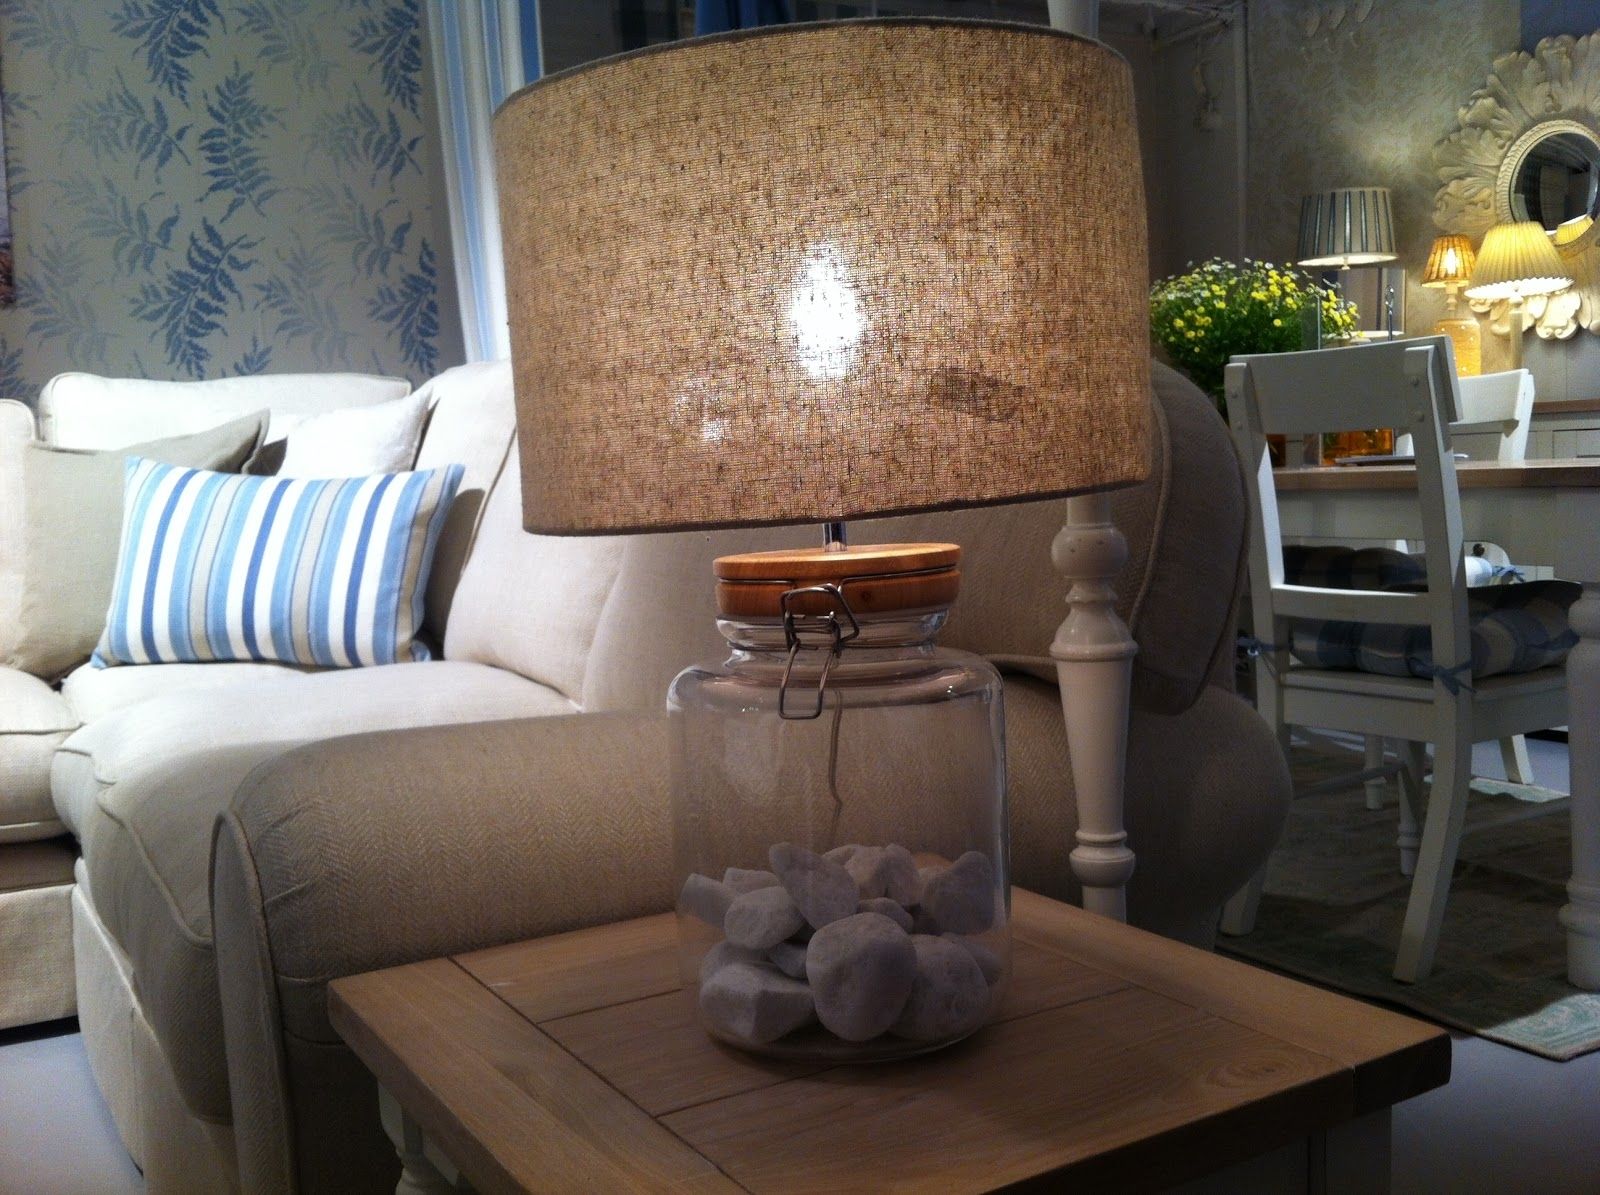 Furniture : Lamp Modern End Table Design White Glass Lamps Wooden Within Laura Ashley Table Lamps For Living Room (View 13 of 15)